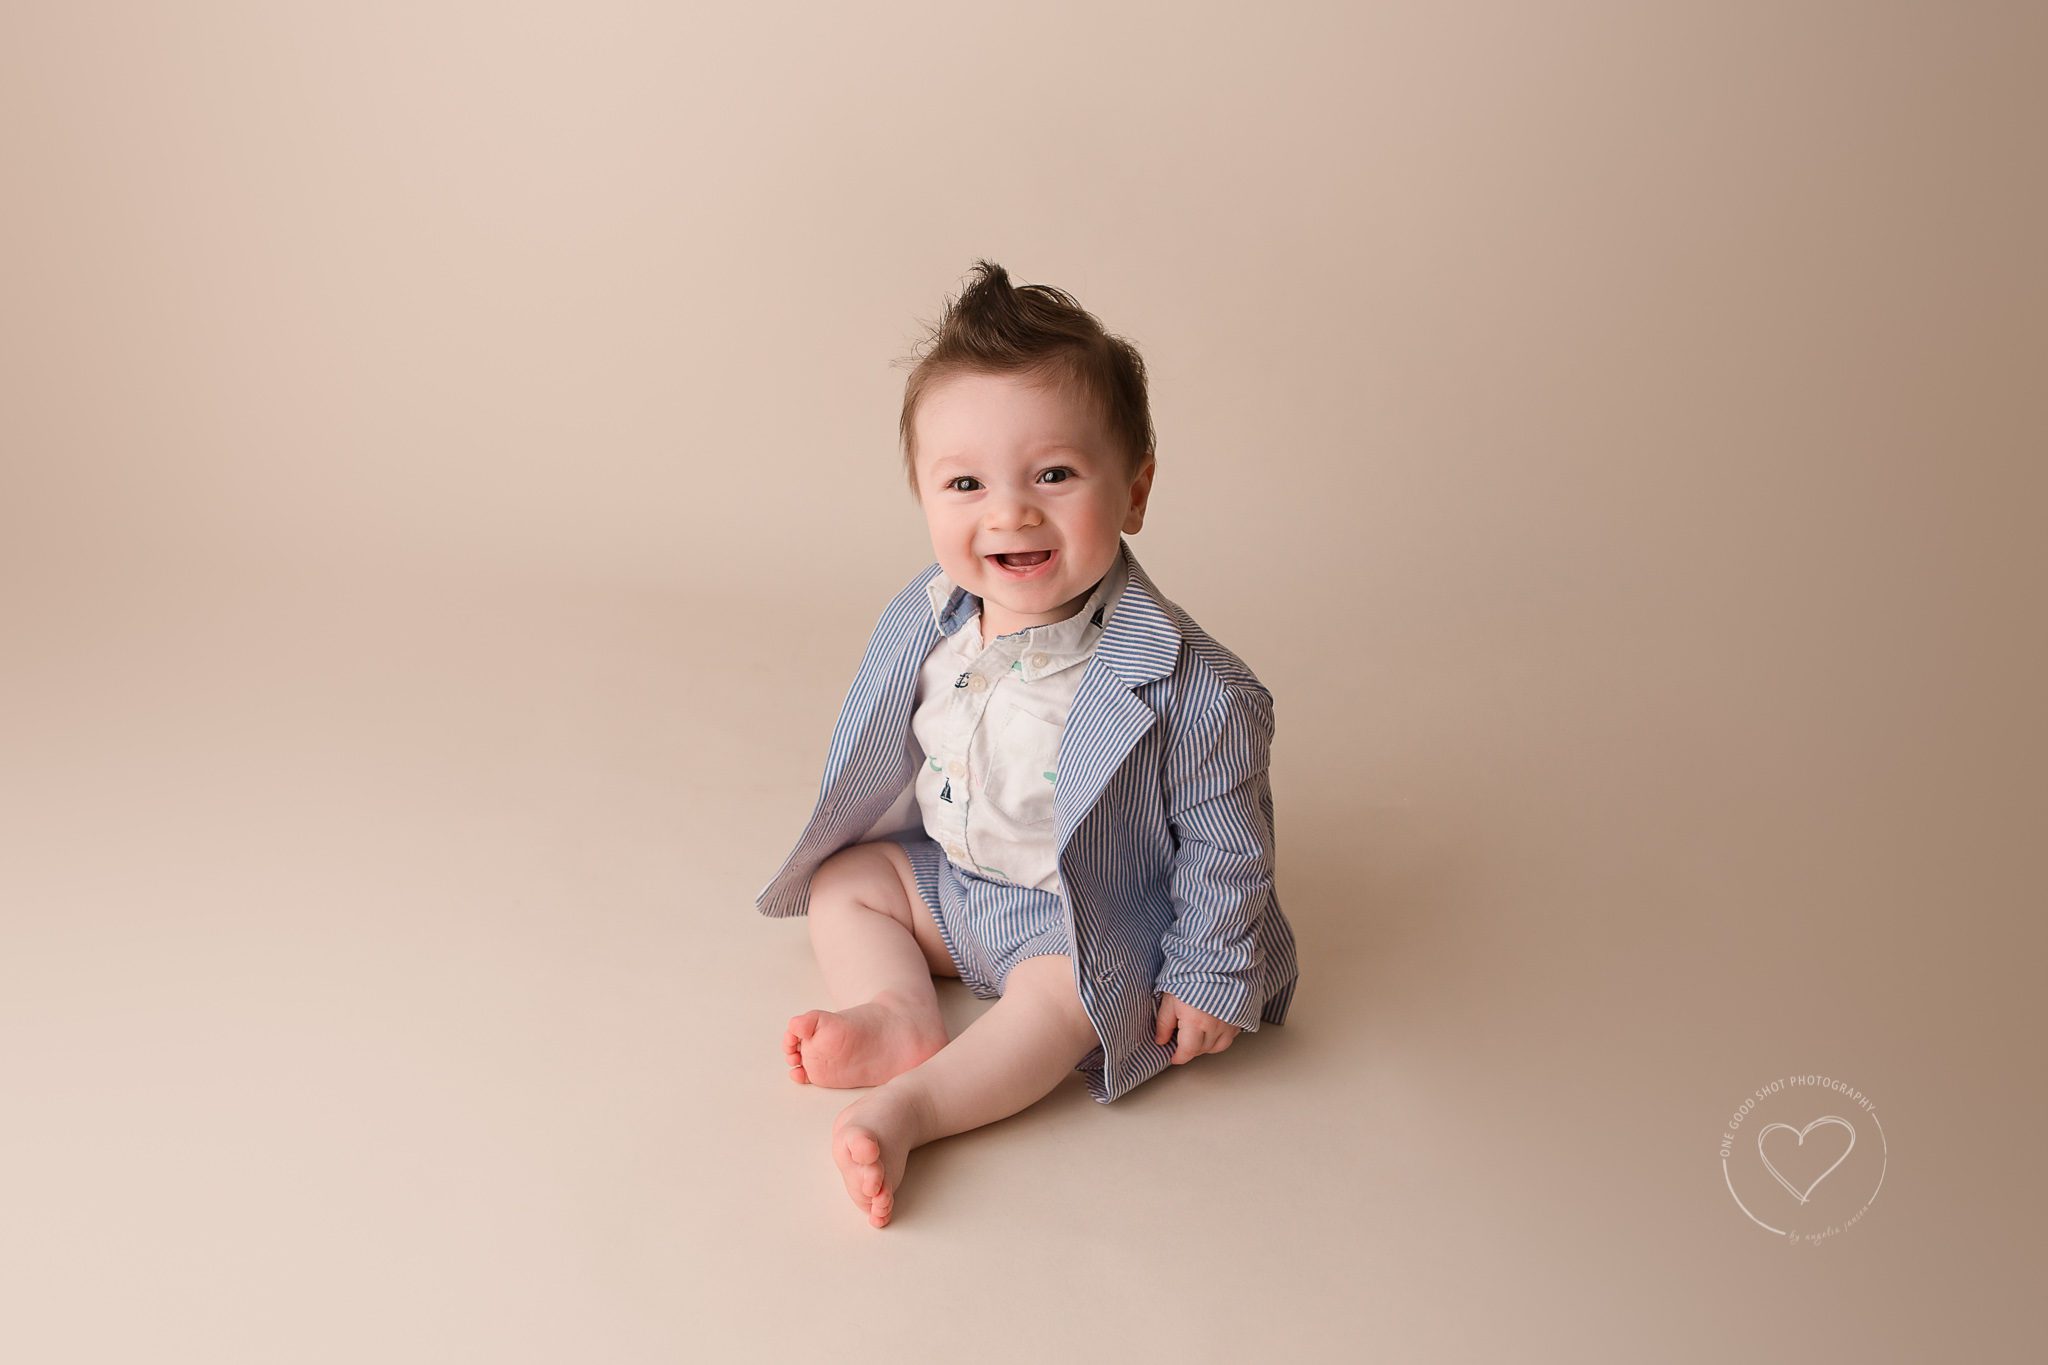 Fresno Baby photographer, 6 month boy, wearing a suit, sitting, smiling